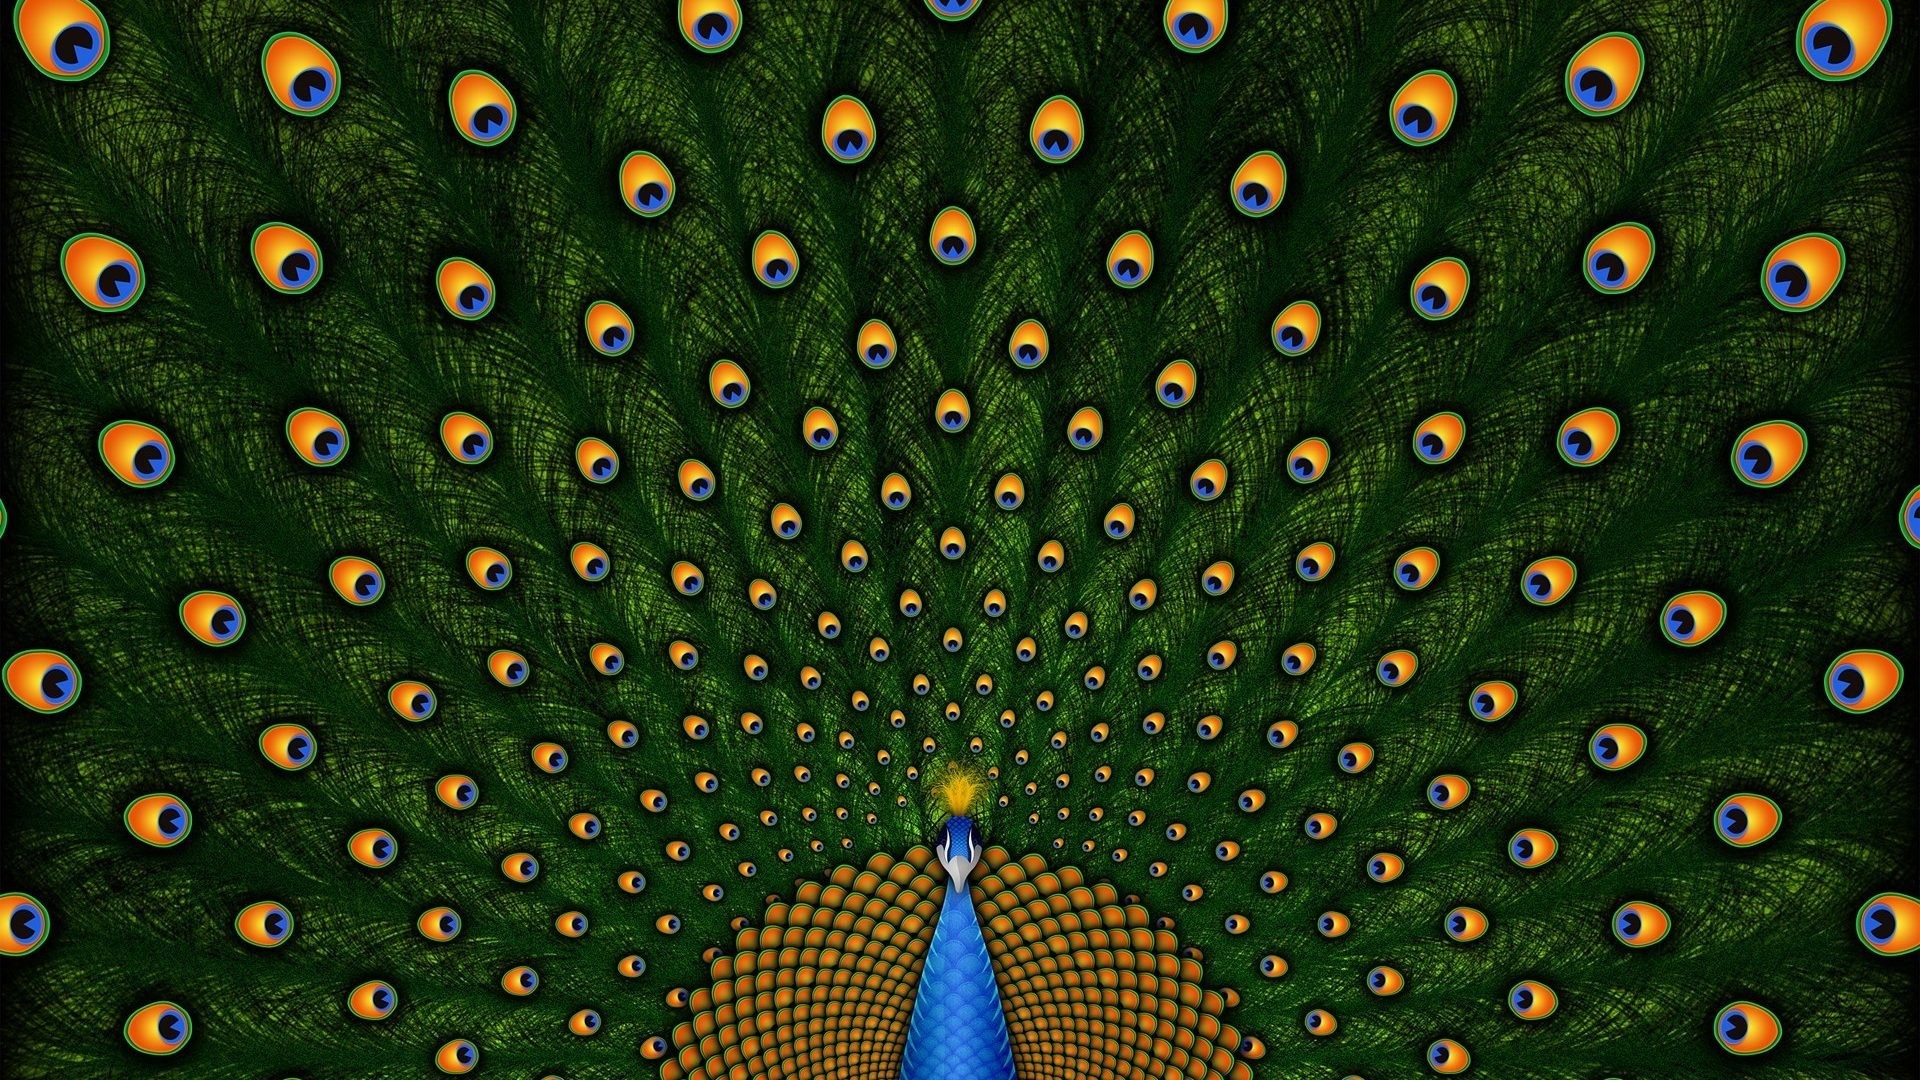 Mirror Reflection Abstract Wallpapers - Peacock Feathers Images In Hd , HD Wallpaper & Backgrounds